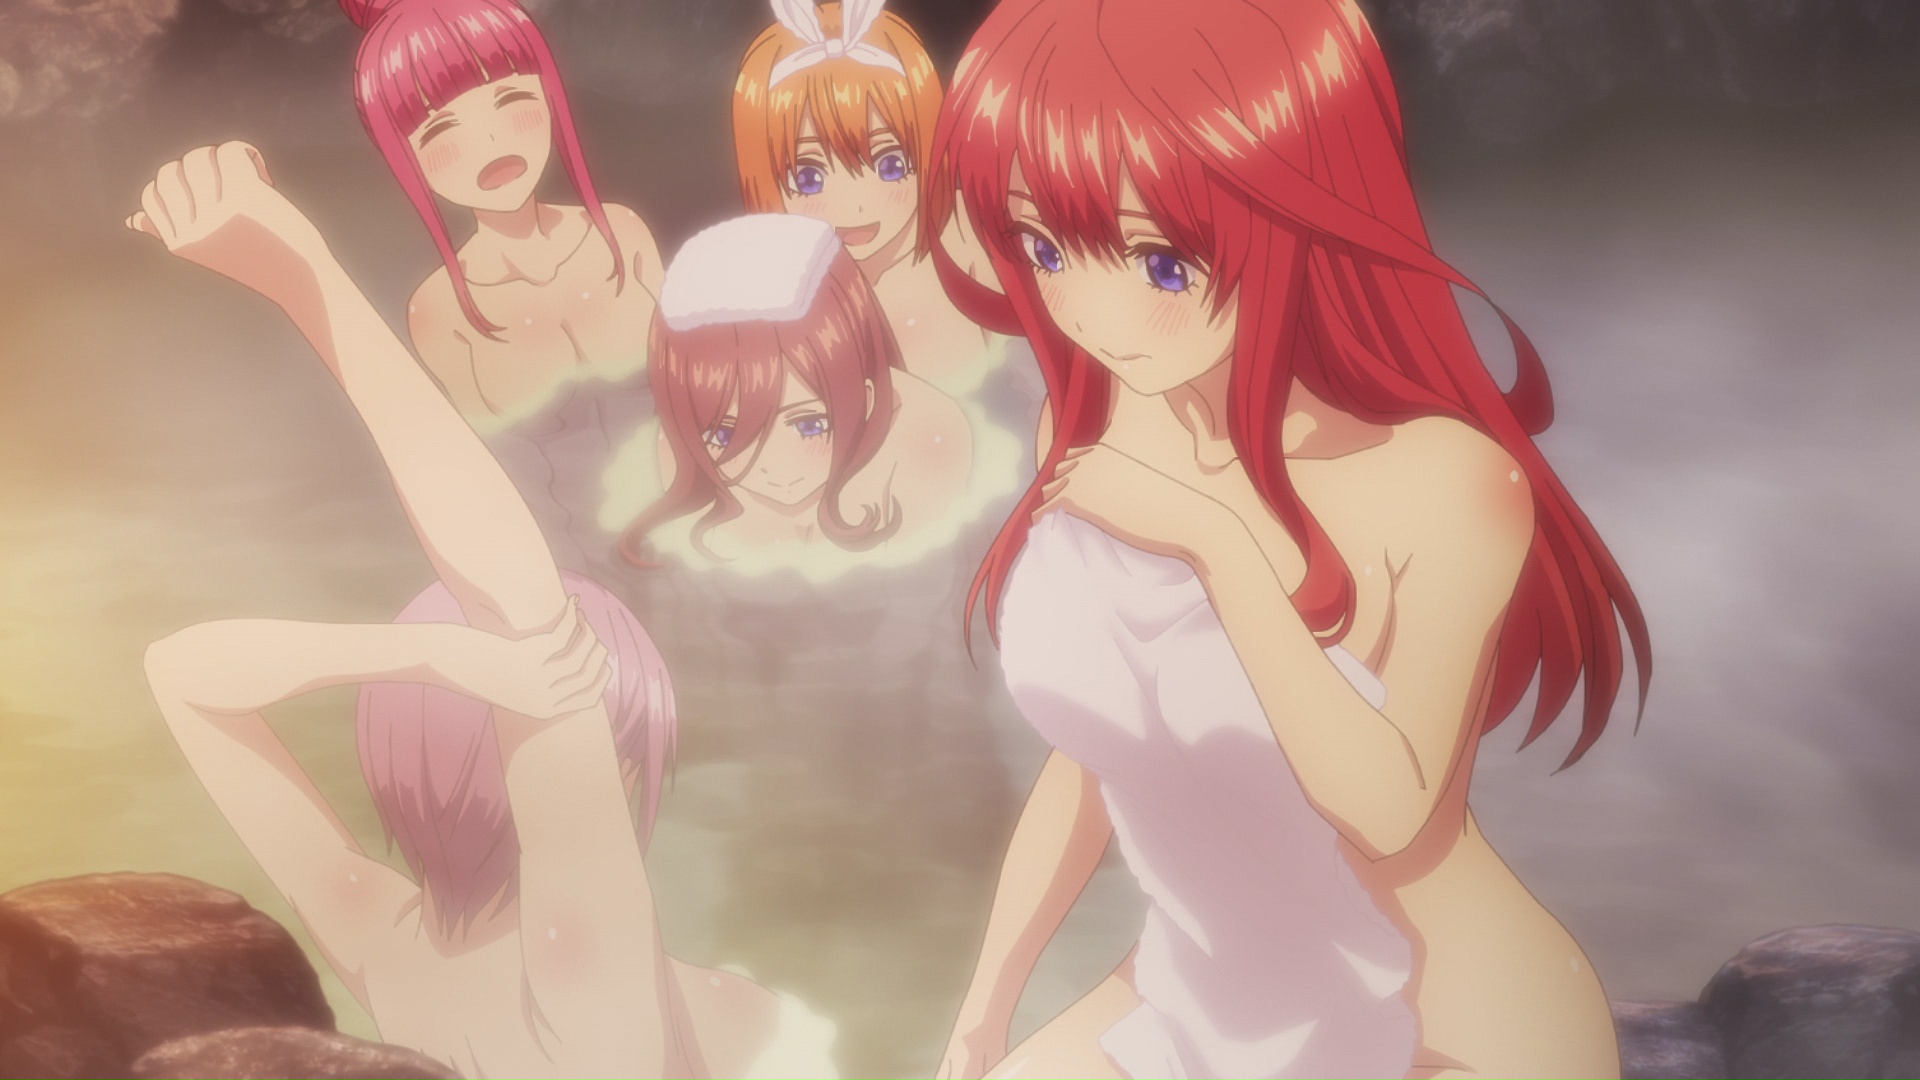 Watch The Quintessential Quintuplets Episode 9 Online - Legend of Fate Day 1